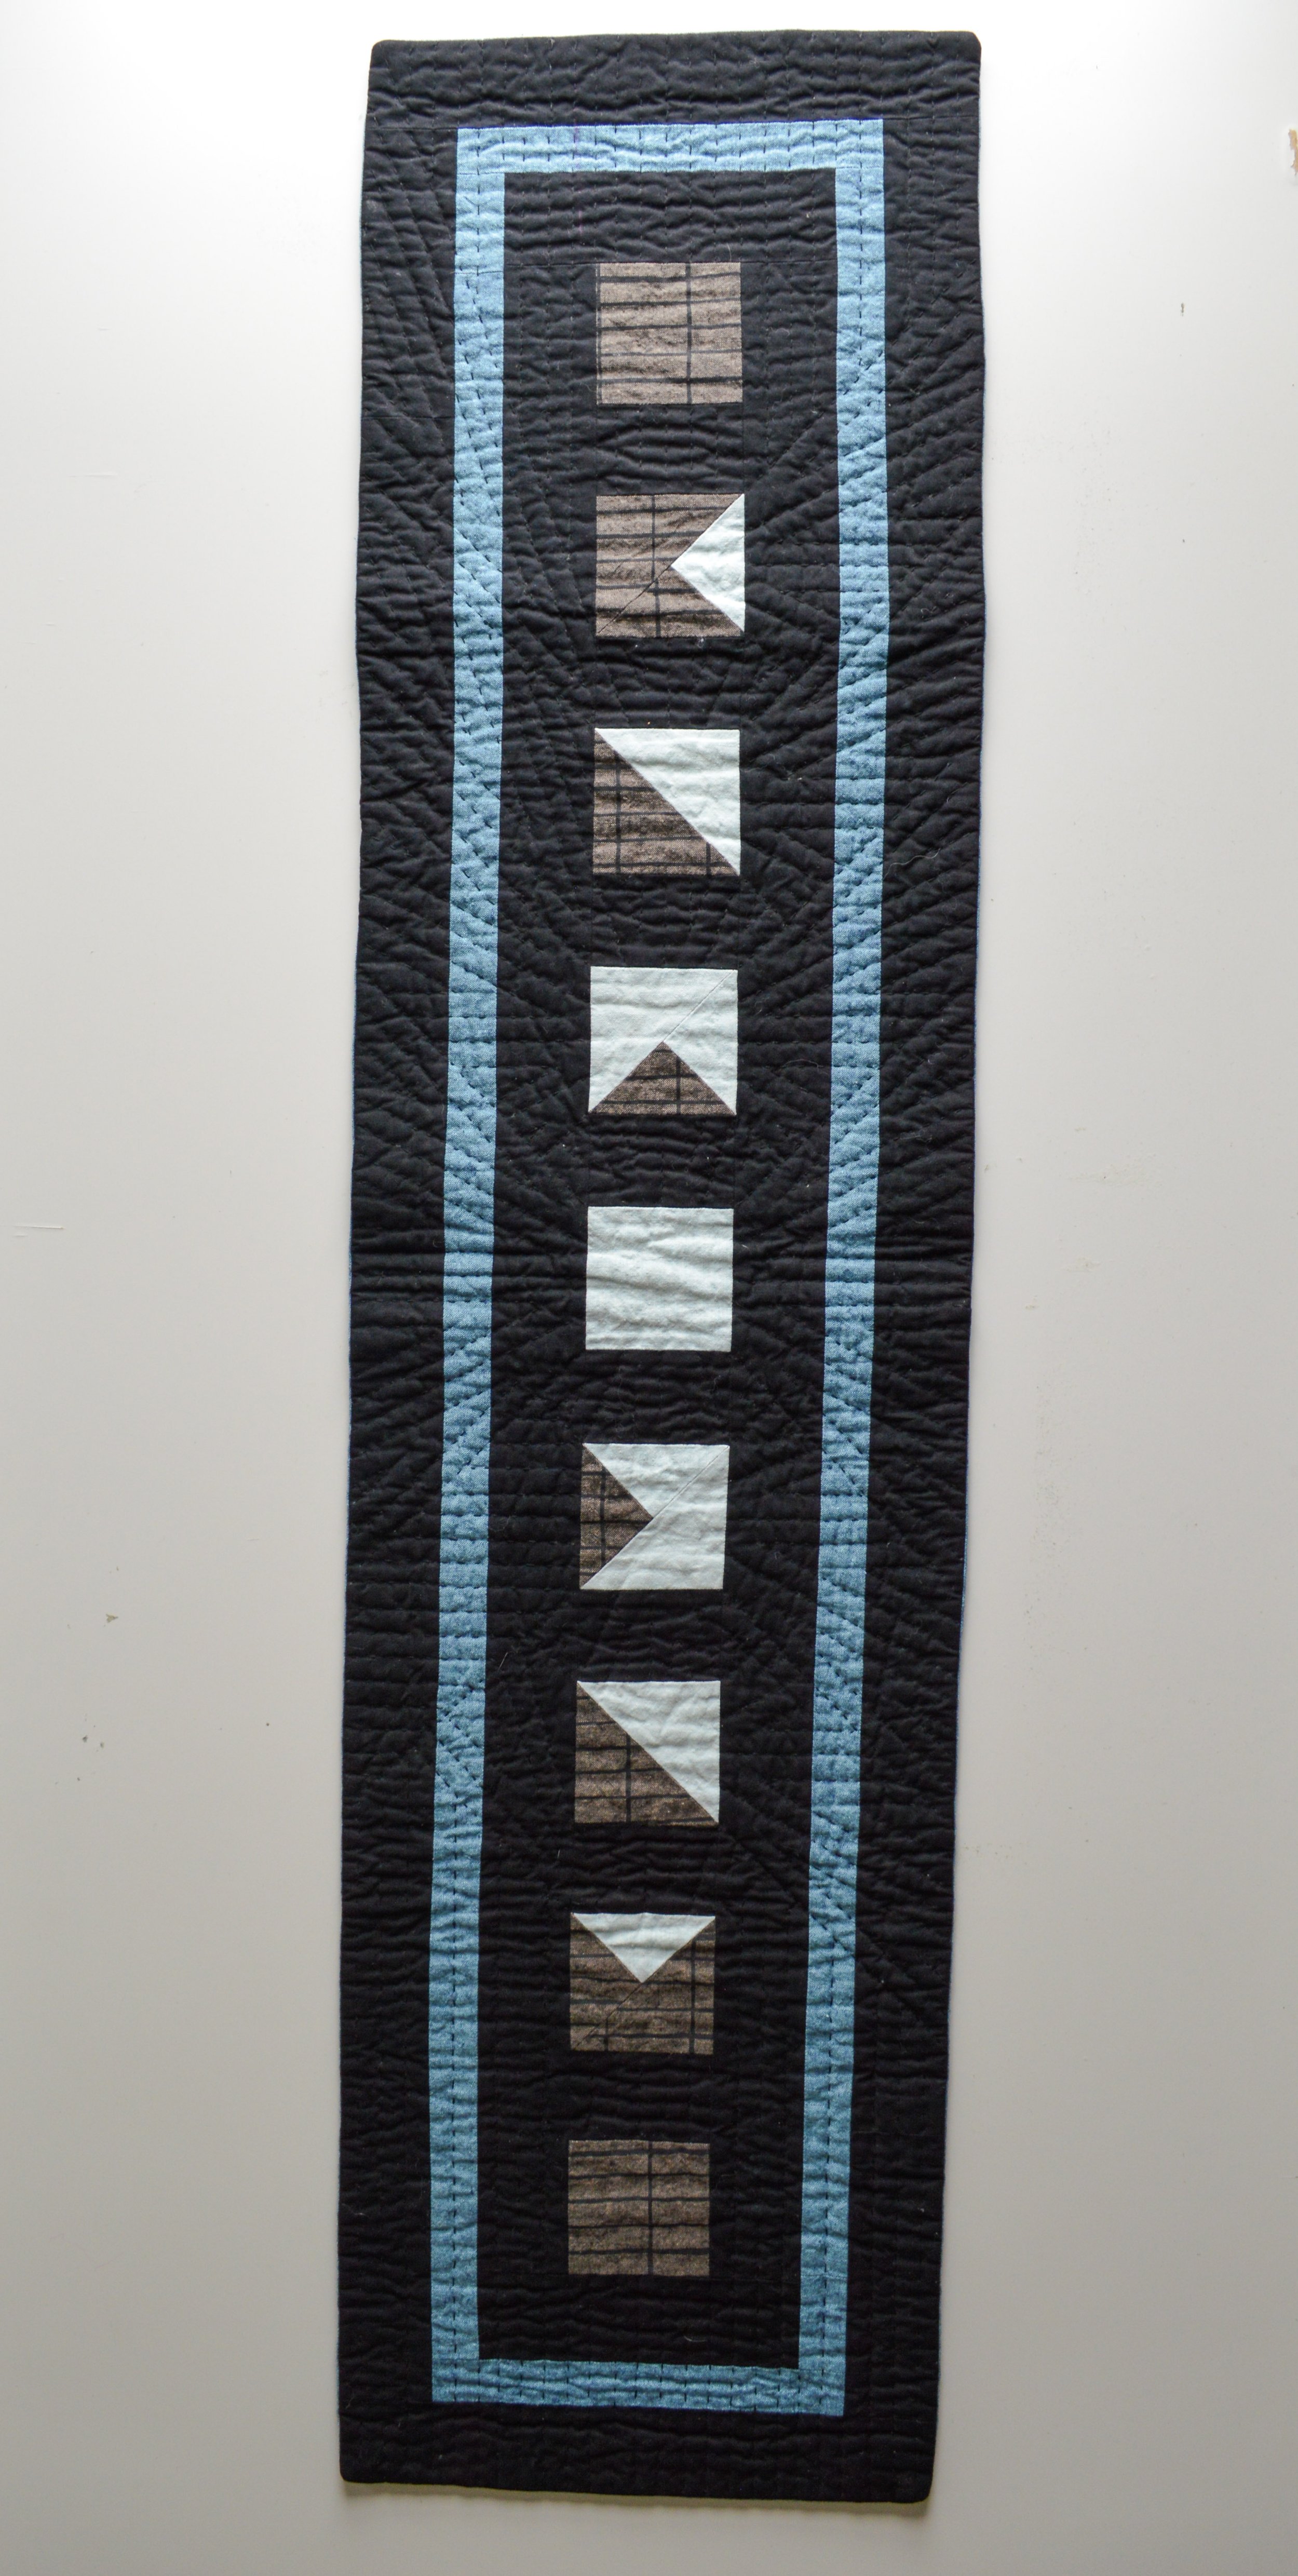  a black mini quilt with a geometric design inspired by the moon 